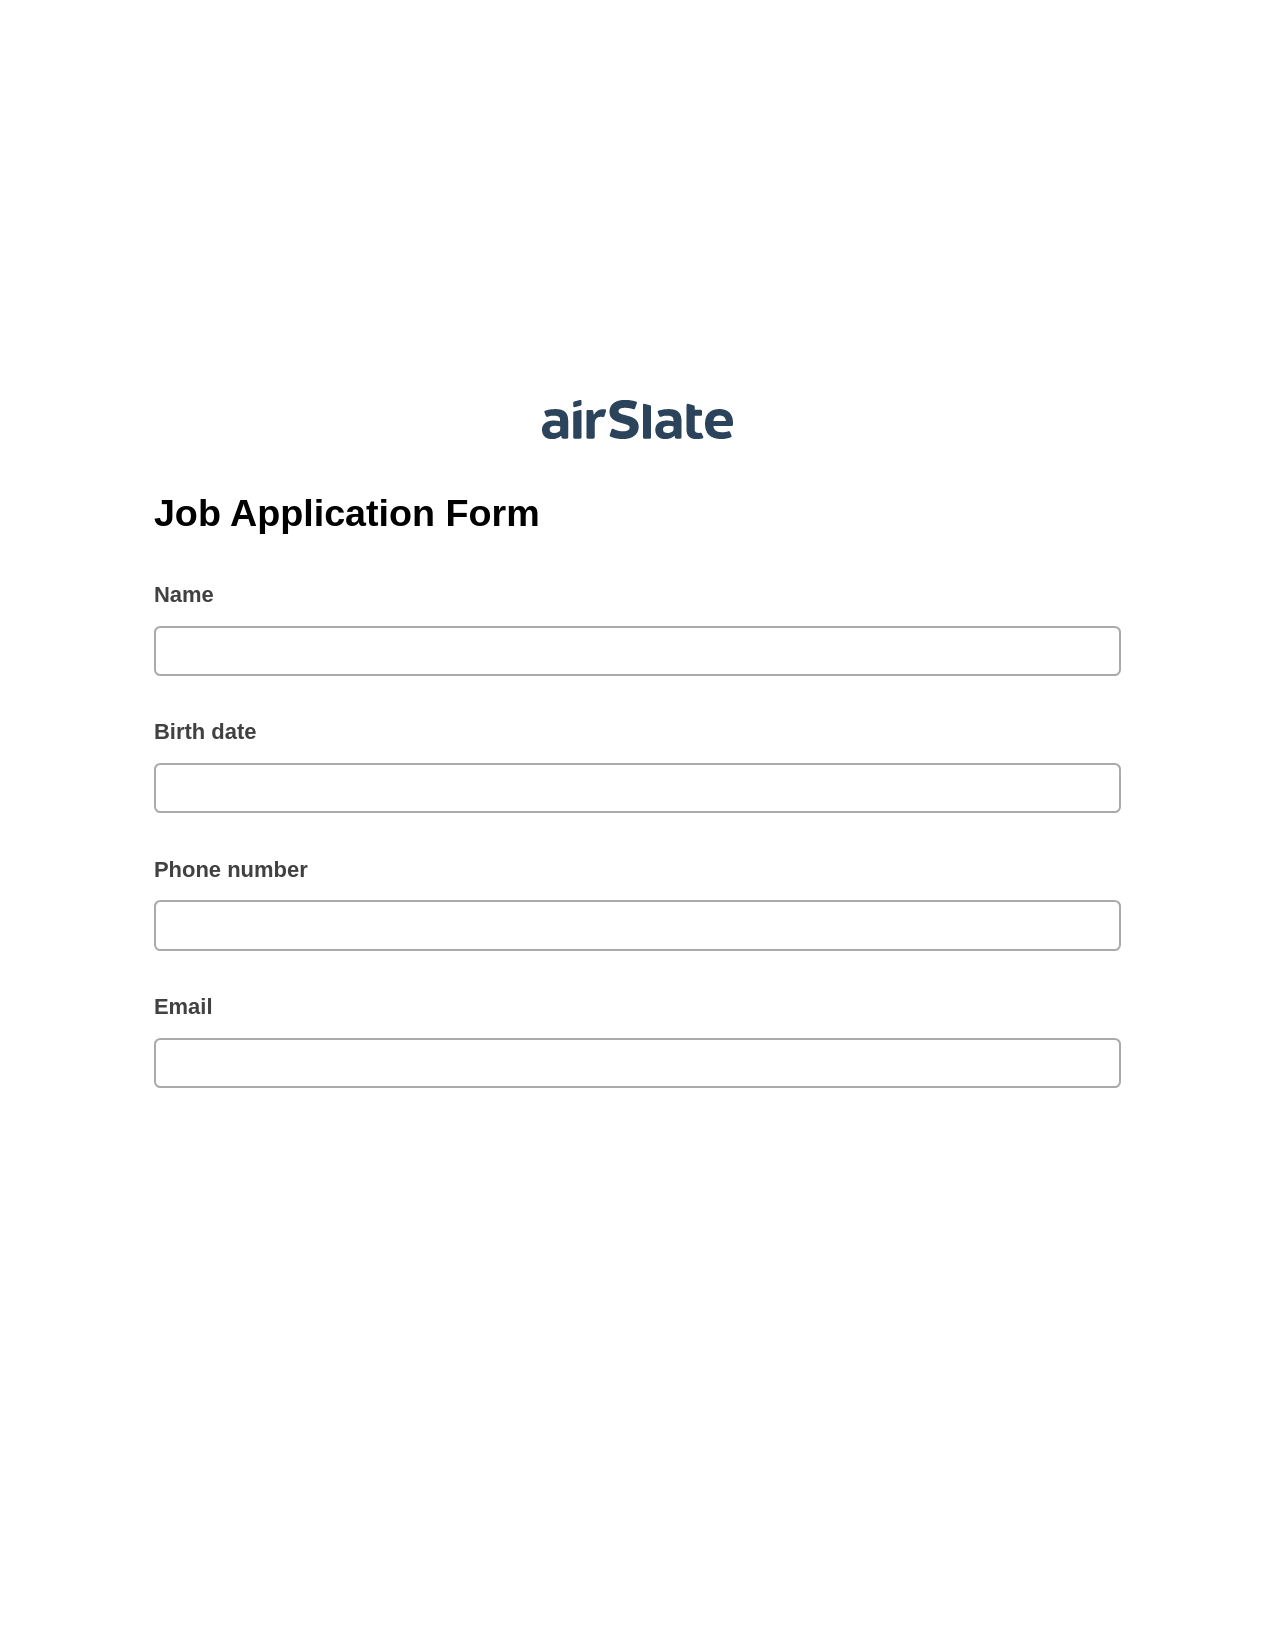 Job Application Form Pre-fill from CSV File Dropdown Options Bot, Create slate addon, Export to NetSuite Record Bot